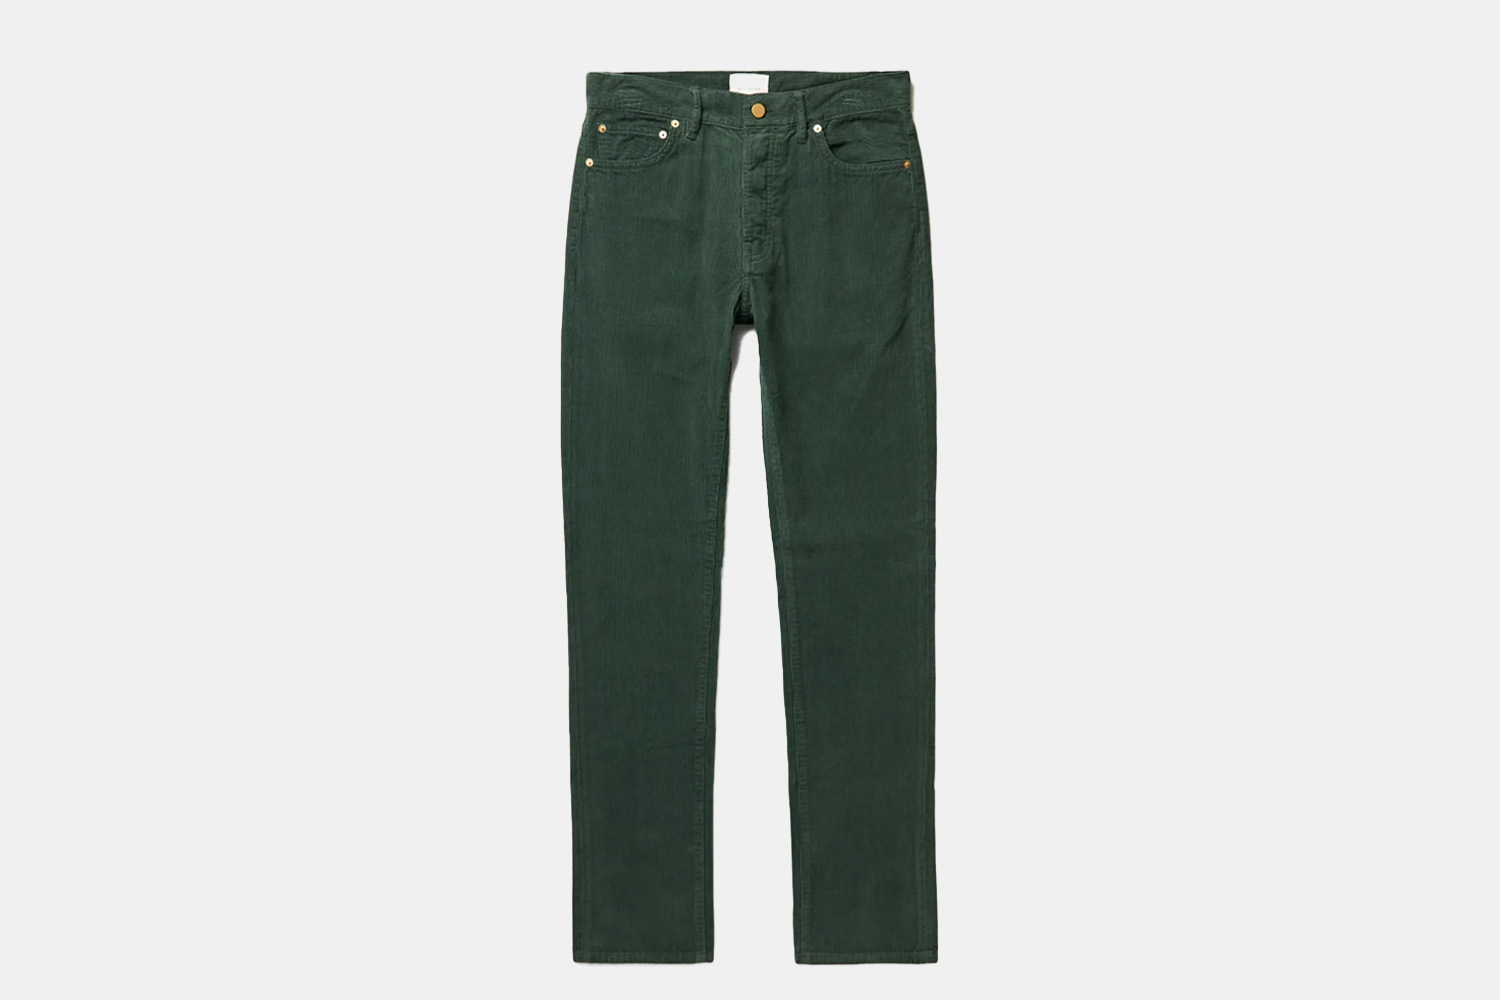 A pair of deep green, slim trousers.